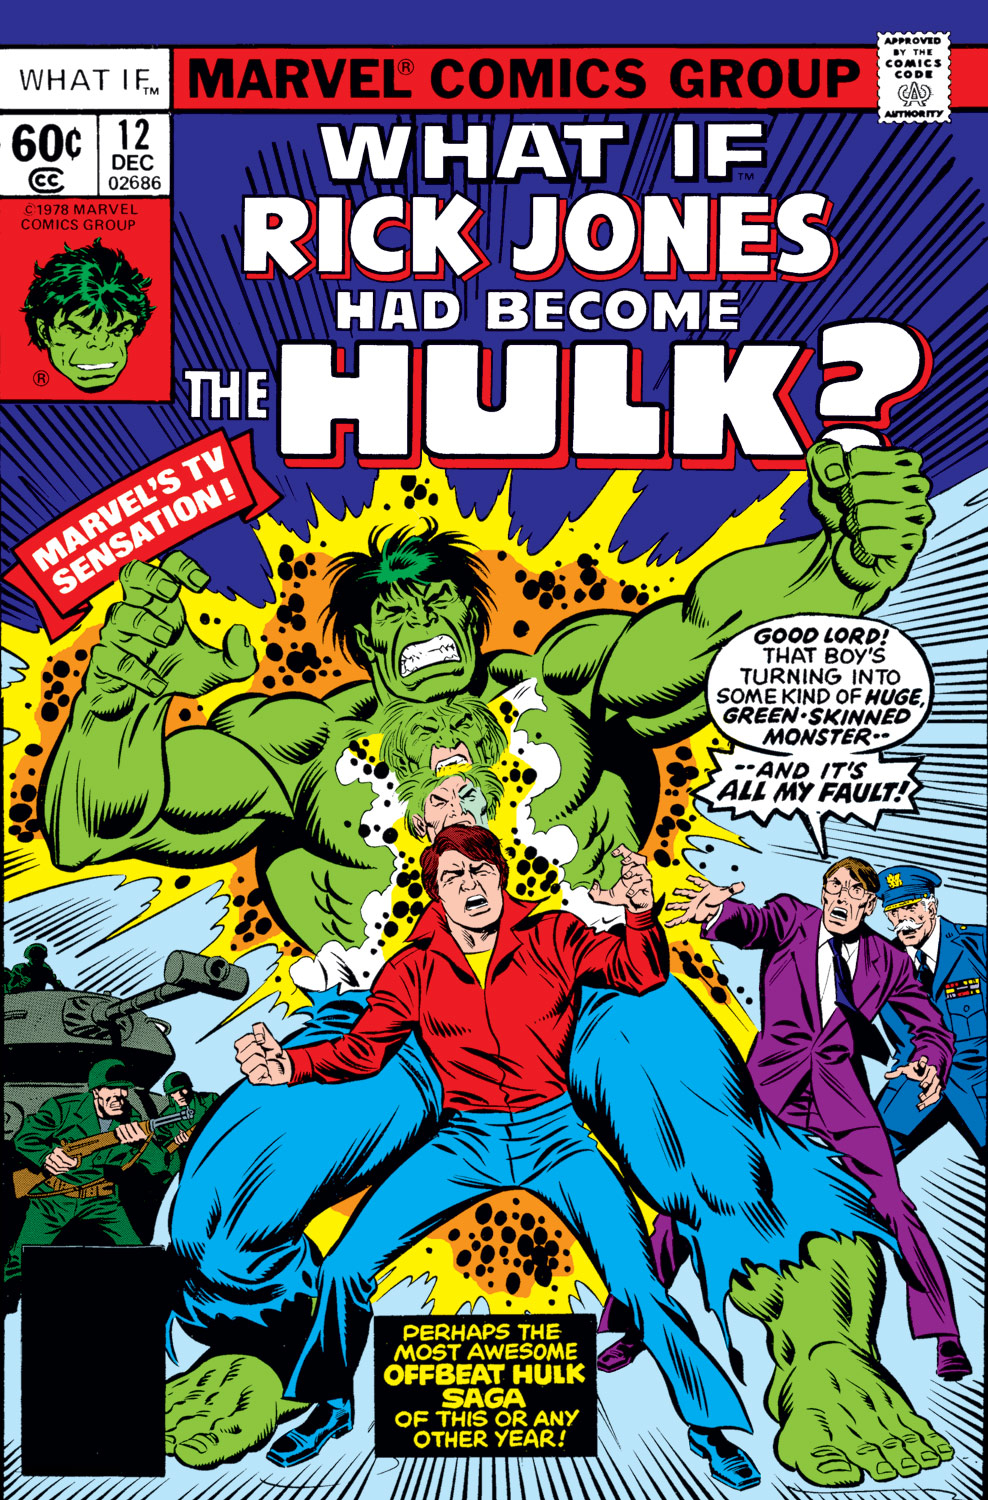 <{ $series->title }} issue 12 - Rick Jones had become the Hulk - Page 1